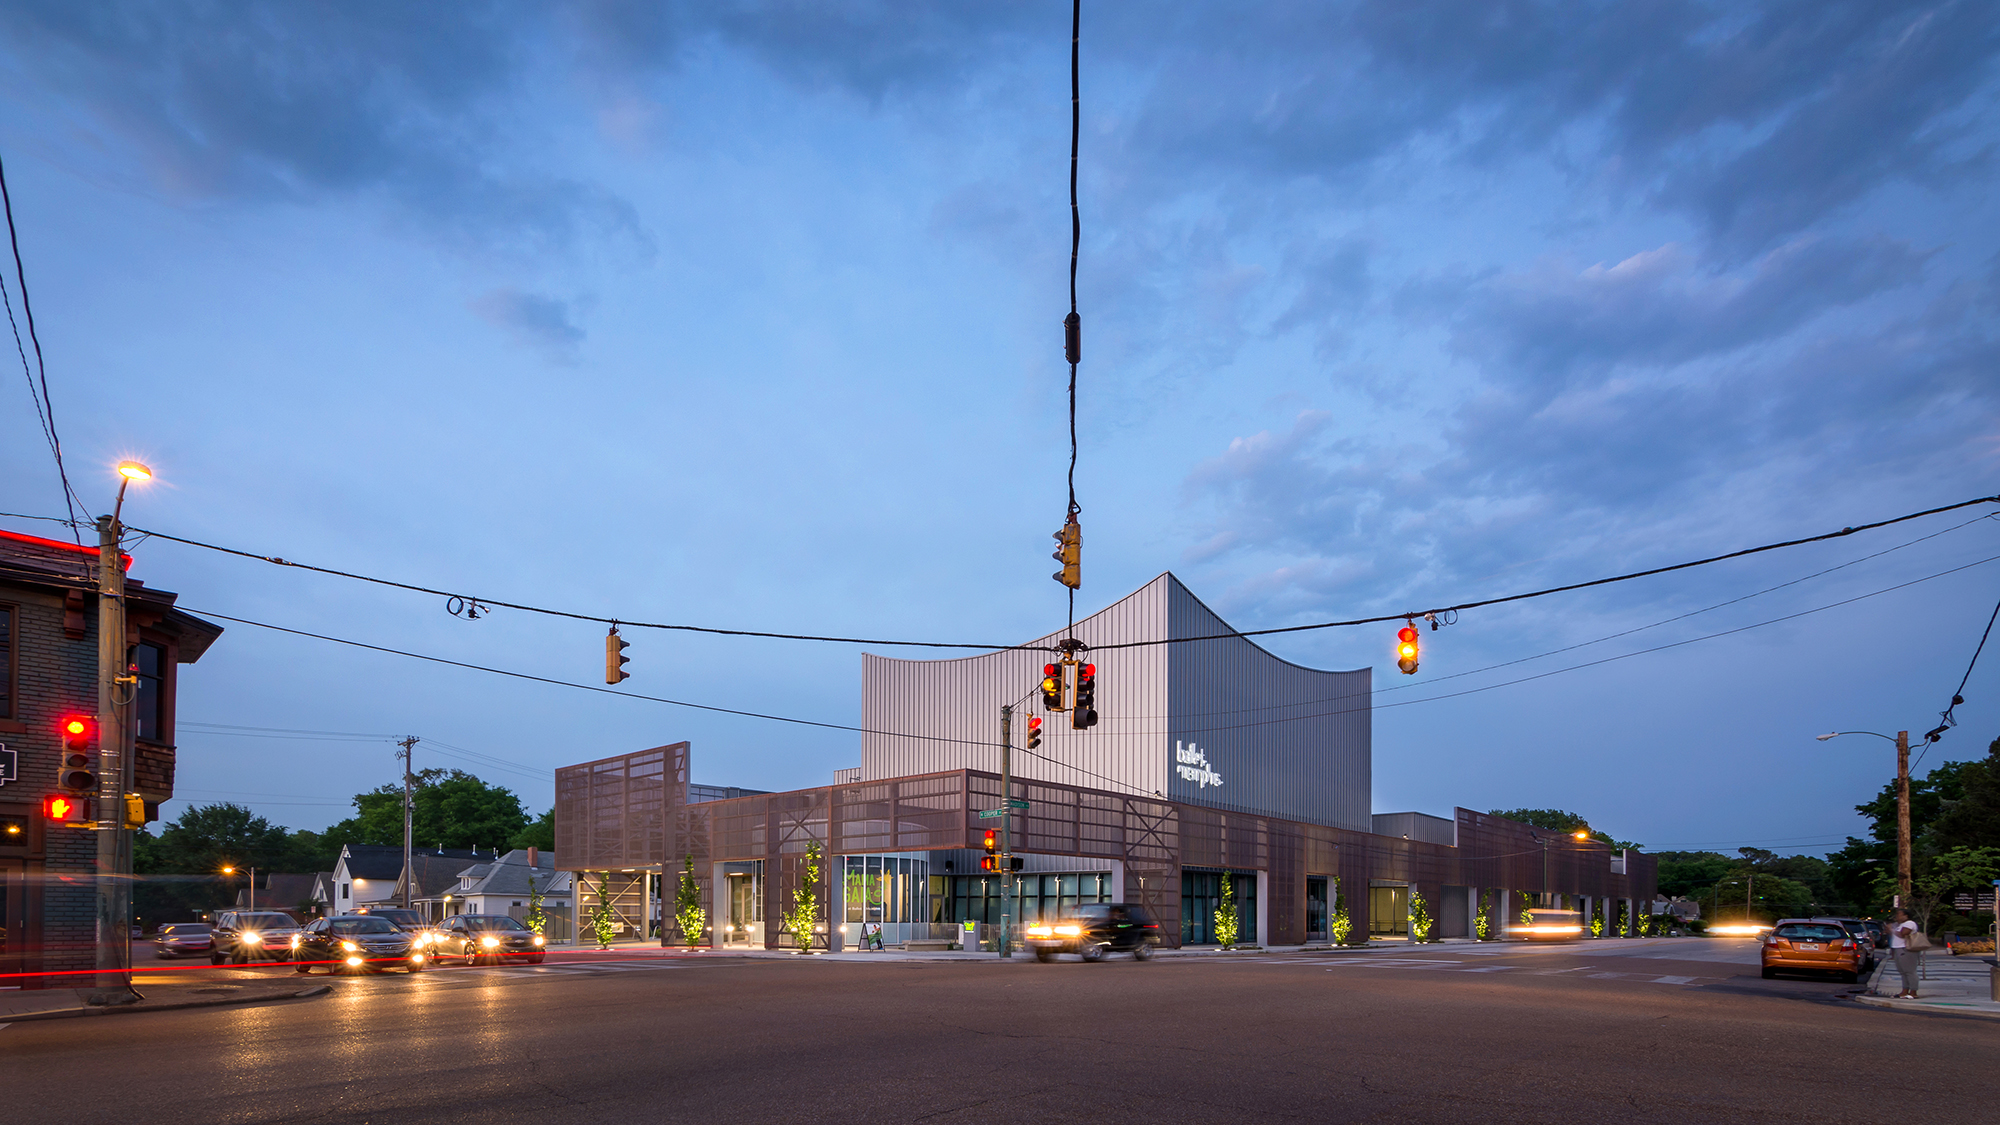 The concave roofline symbolizes the openness of this arts community